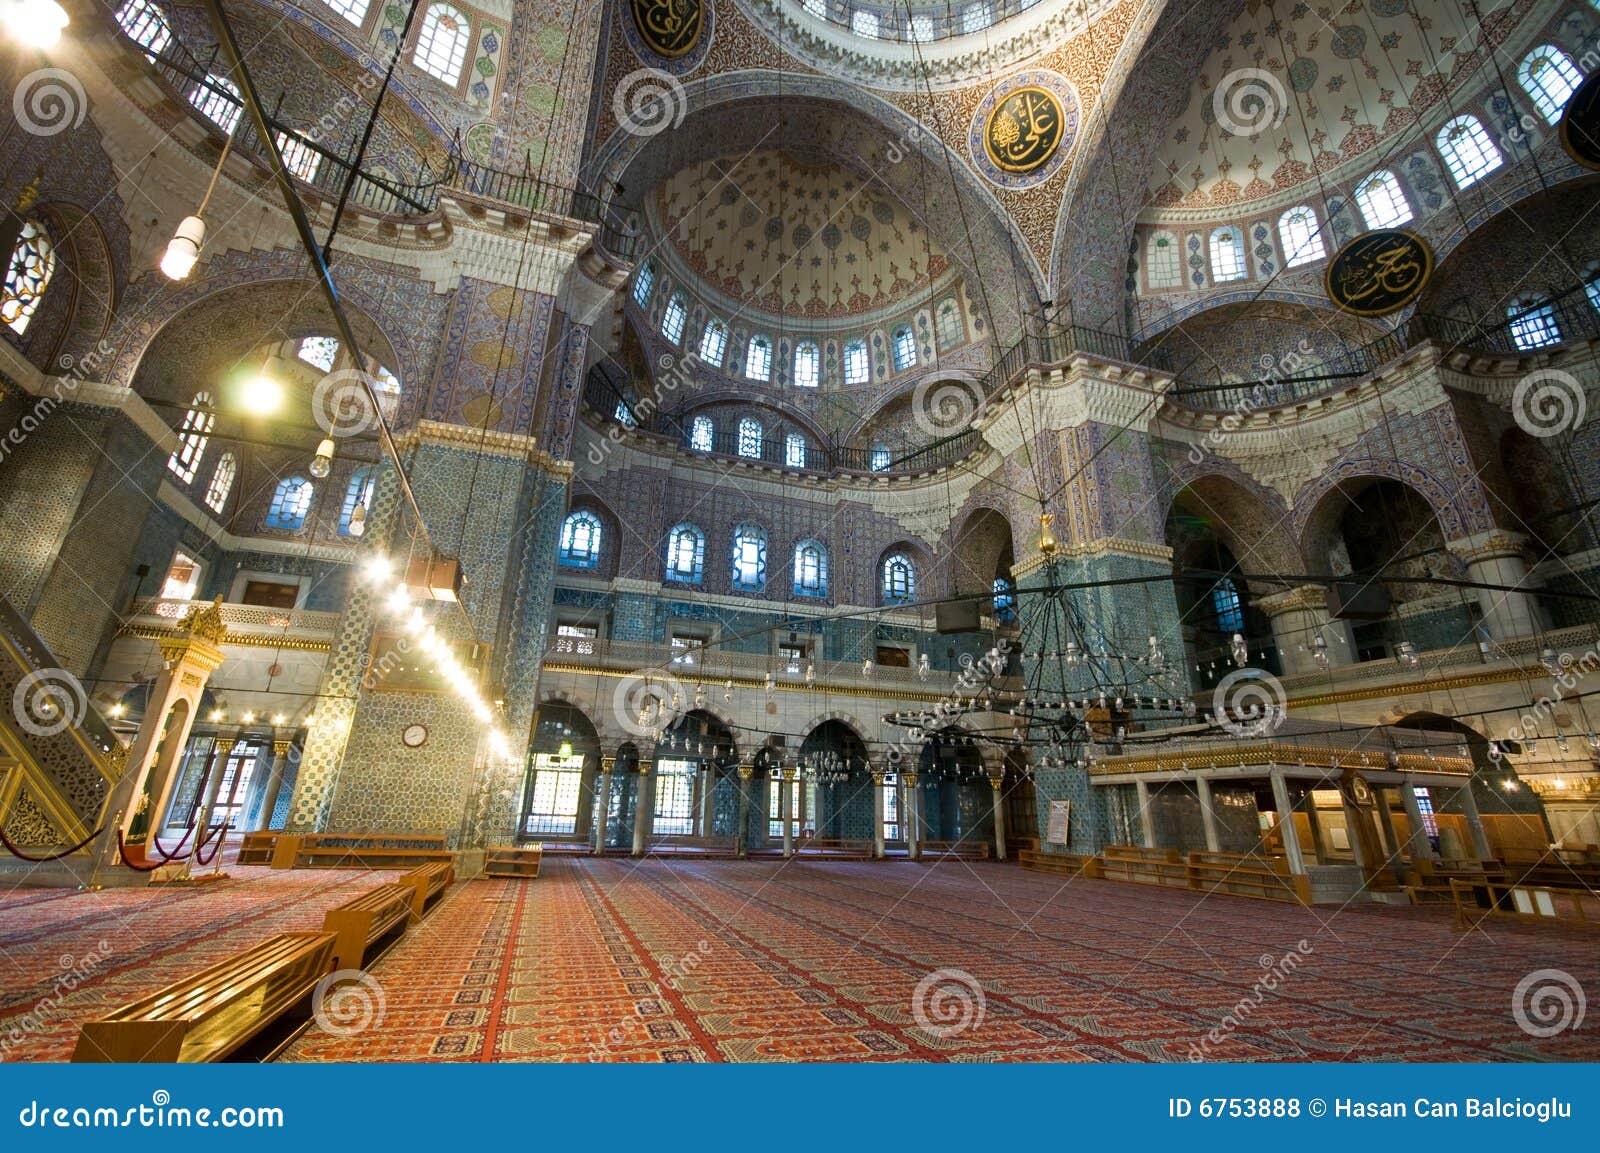 yeni cami (new mosque) in istanbul, turkey